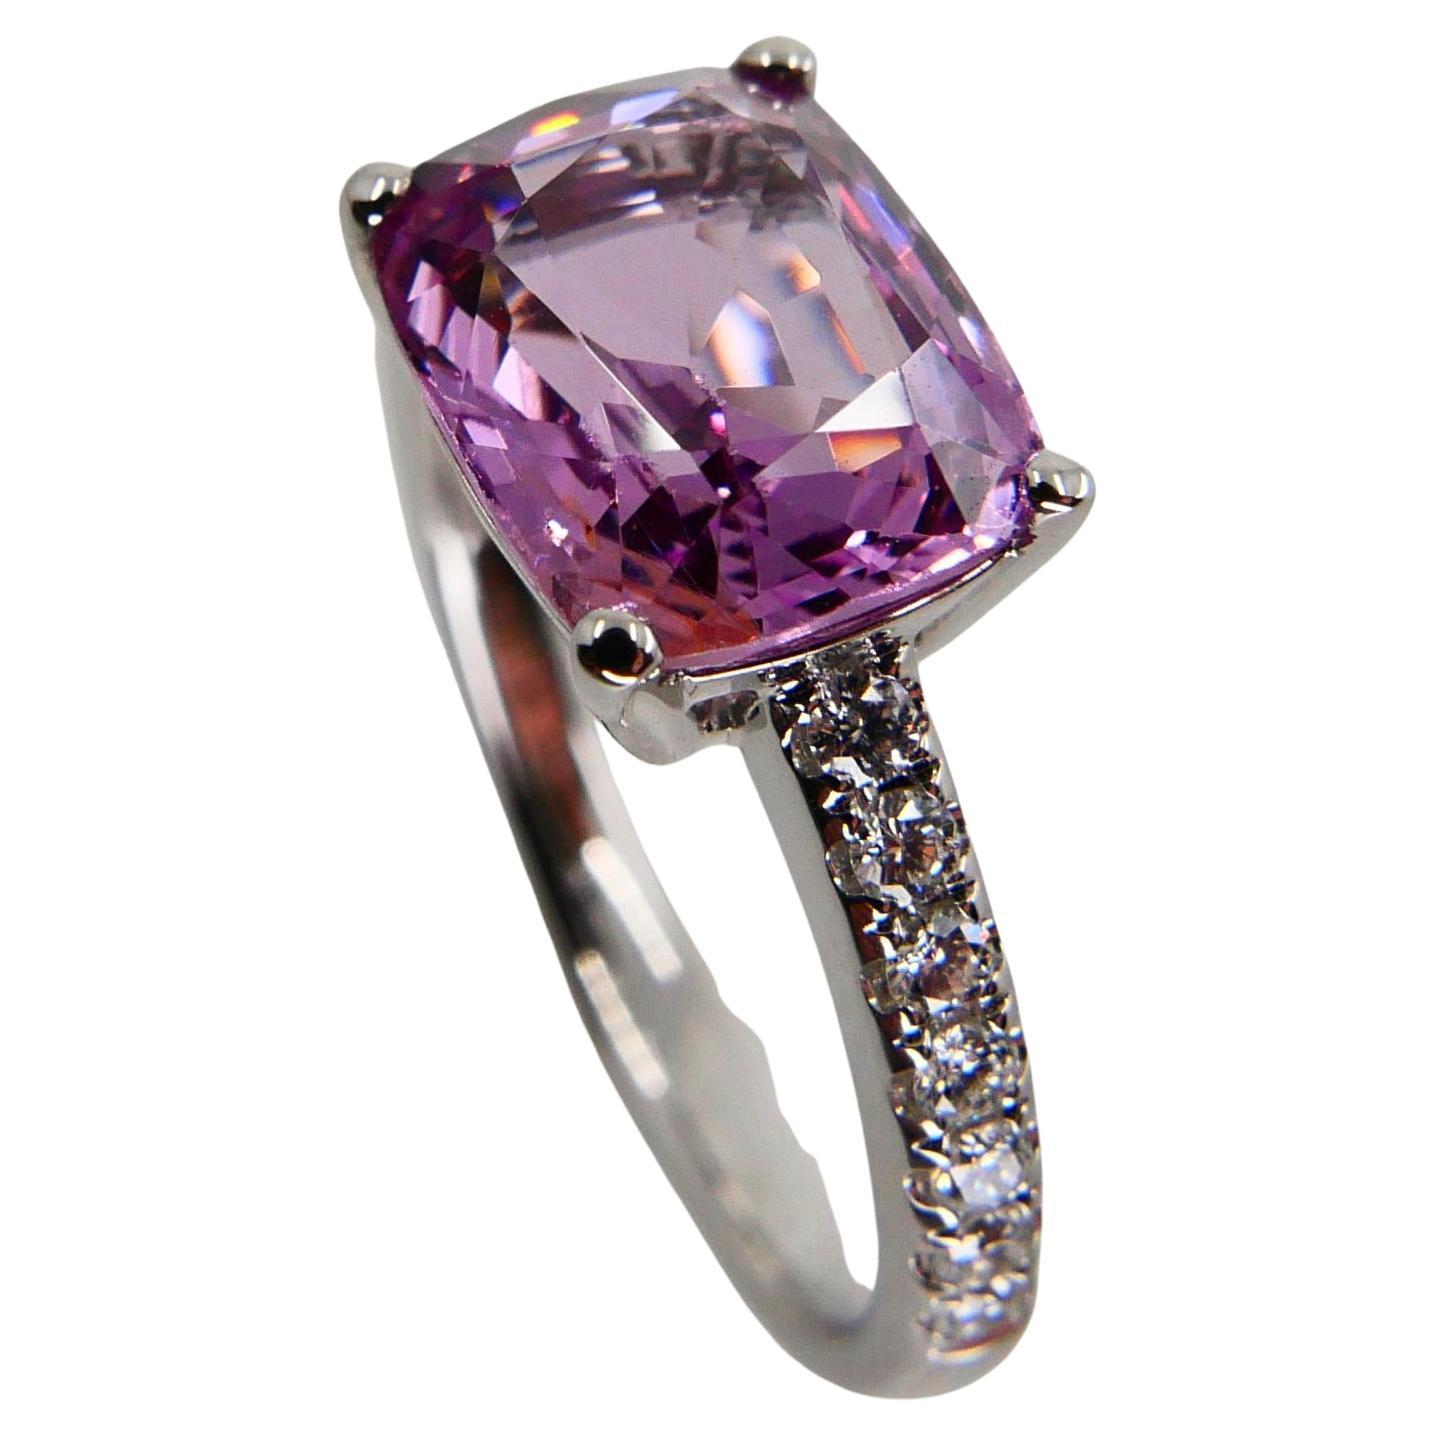 Women's Natural 2.99 Carat Pink Spinel and Diamond Cocktail Ring Set in 18 Karat Gold For Sale